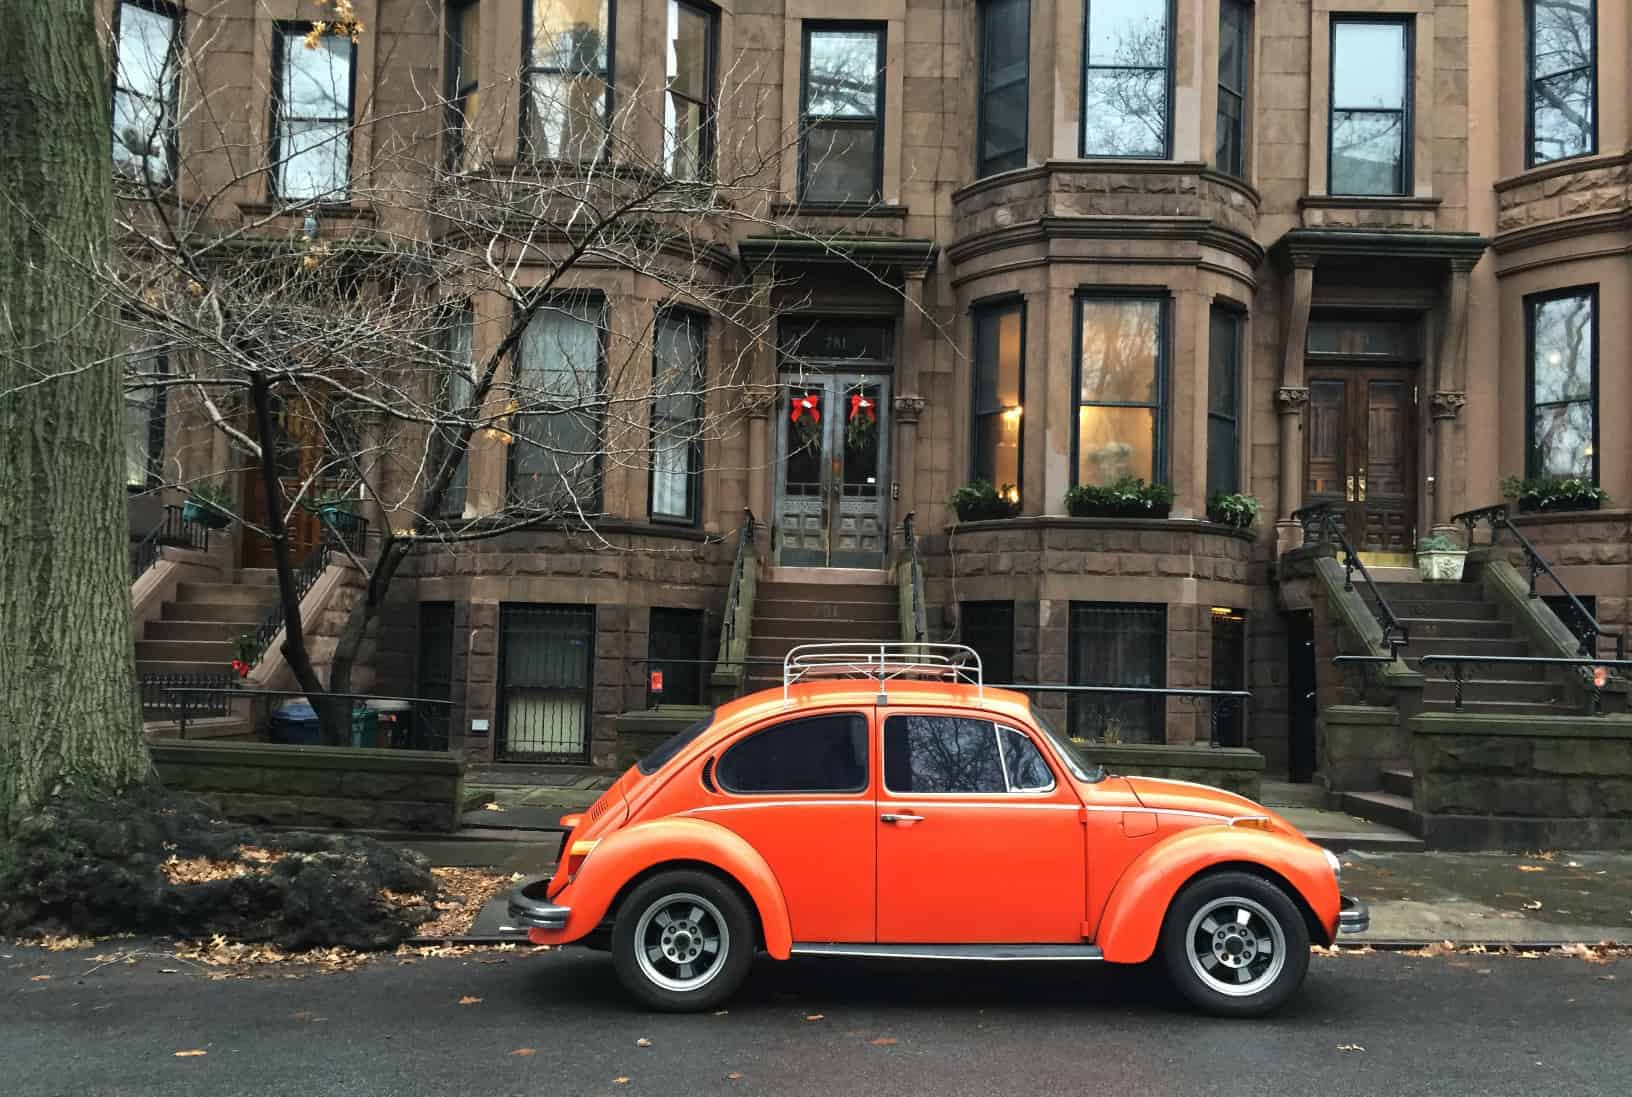 End of an Era for the Iconic VW Beetle